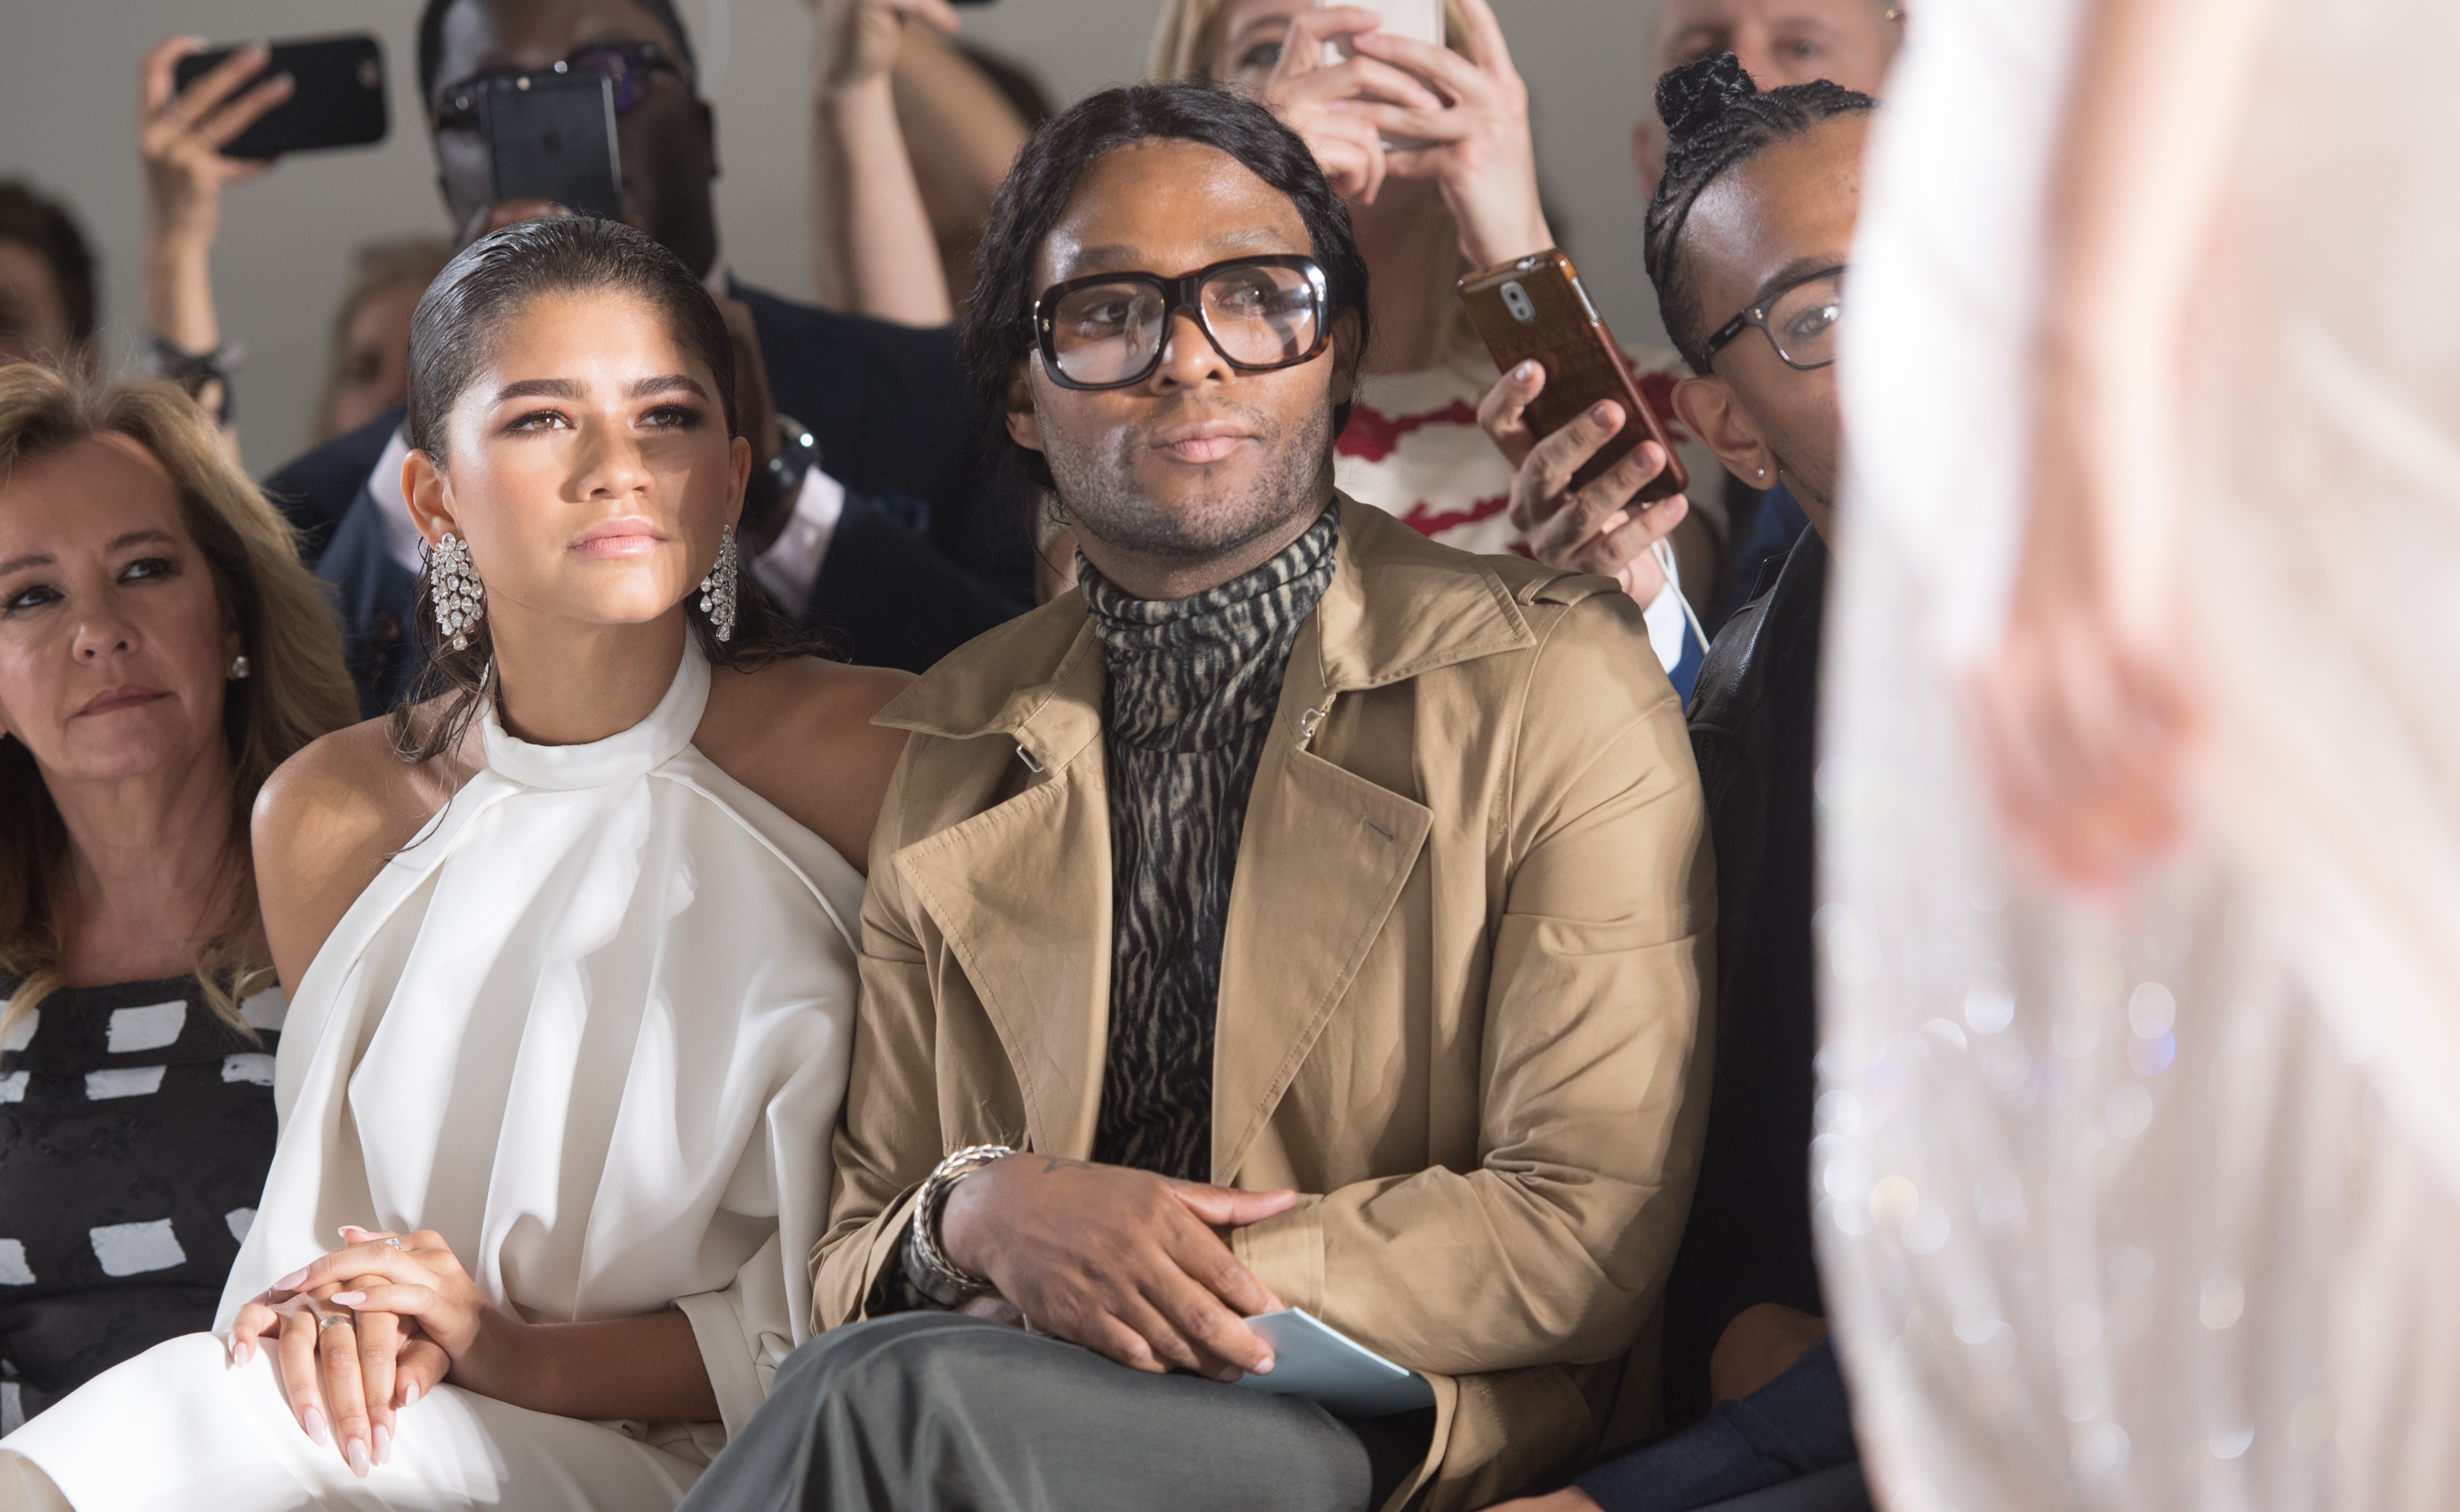 Close-up of Law and Zendaya sitting together at a fashion show